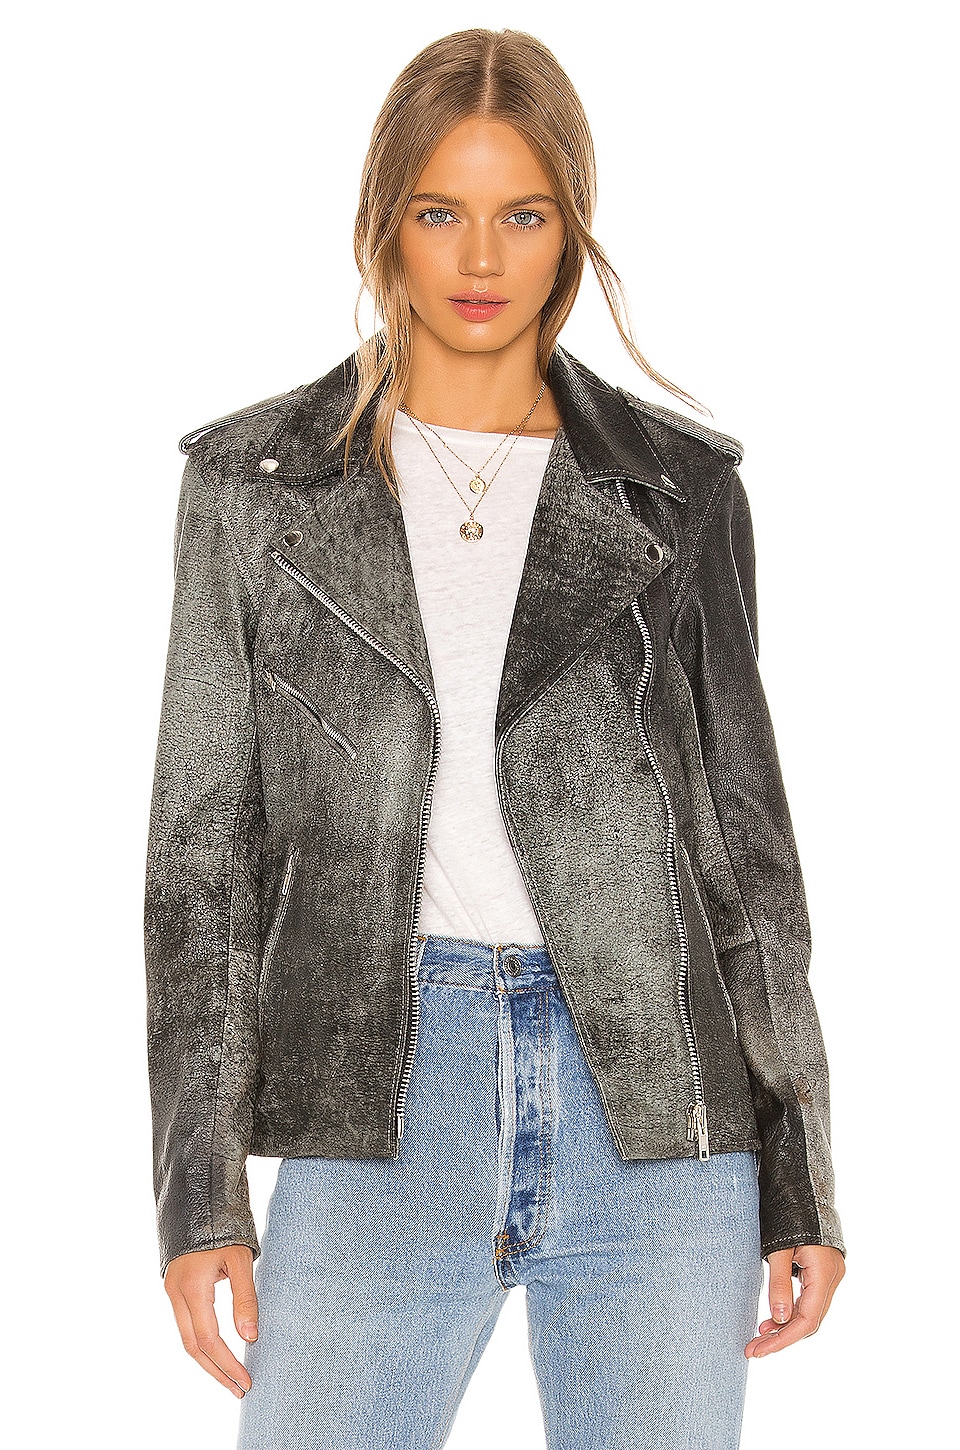 Understated Leather Oversized Easy Rider Jacket in Distressed Black ...